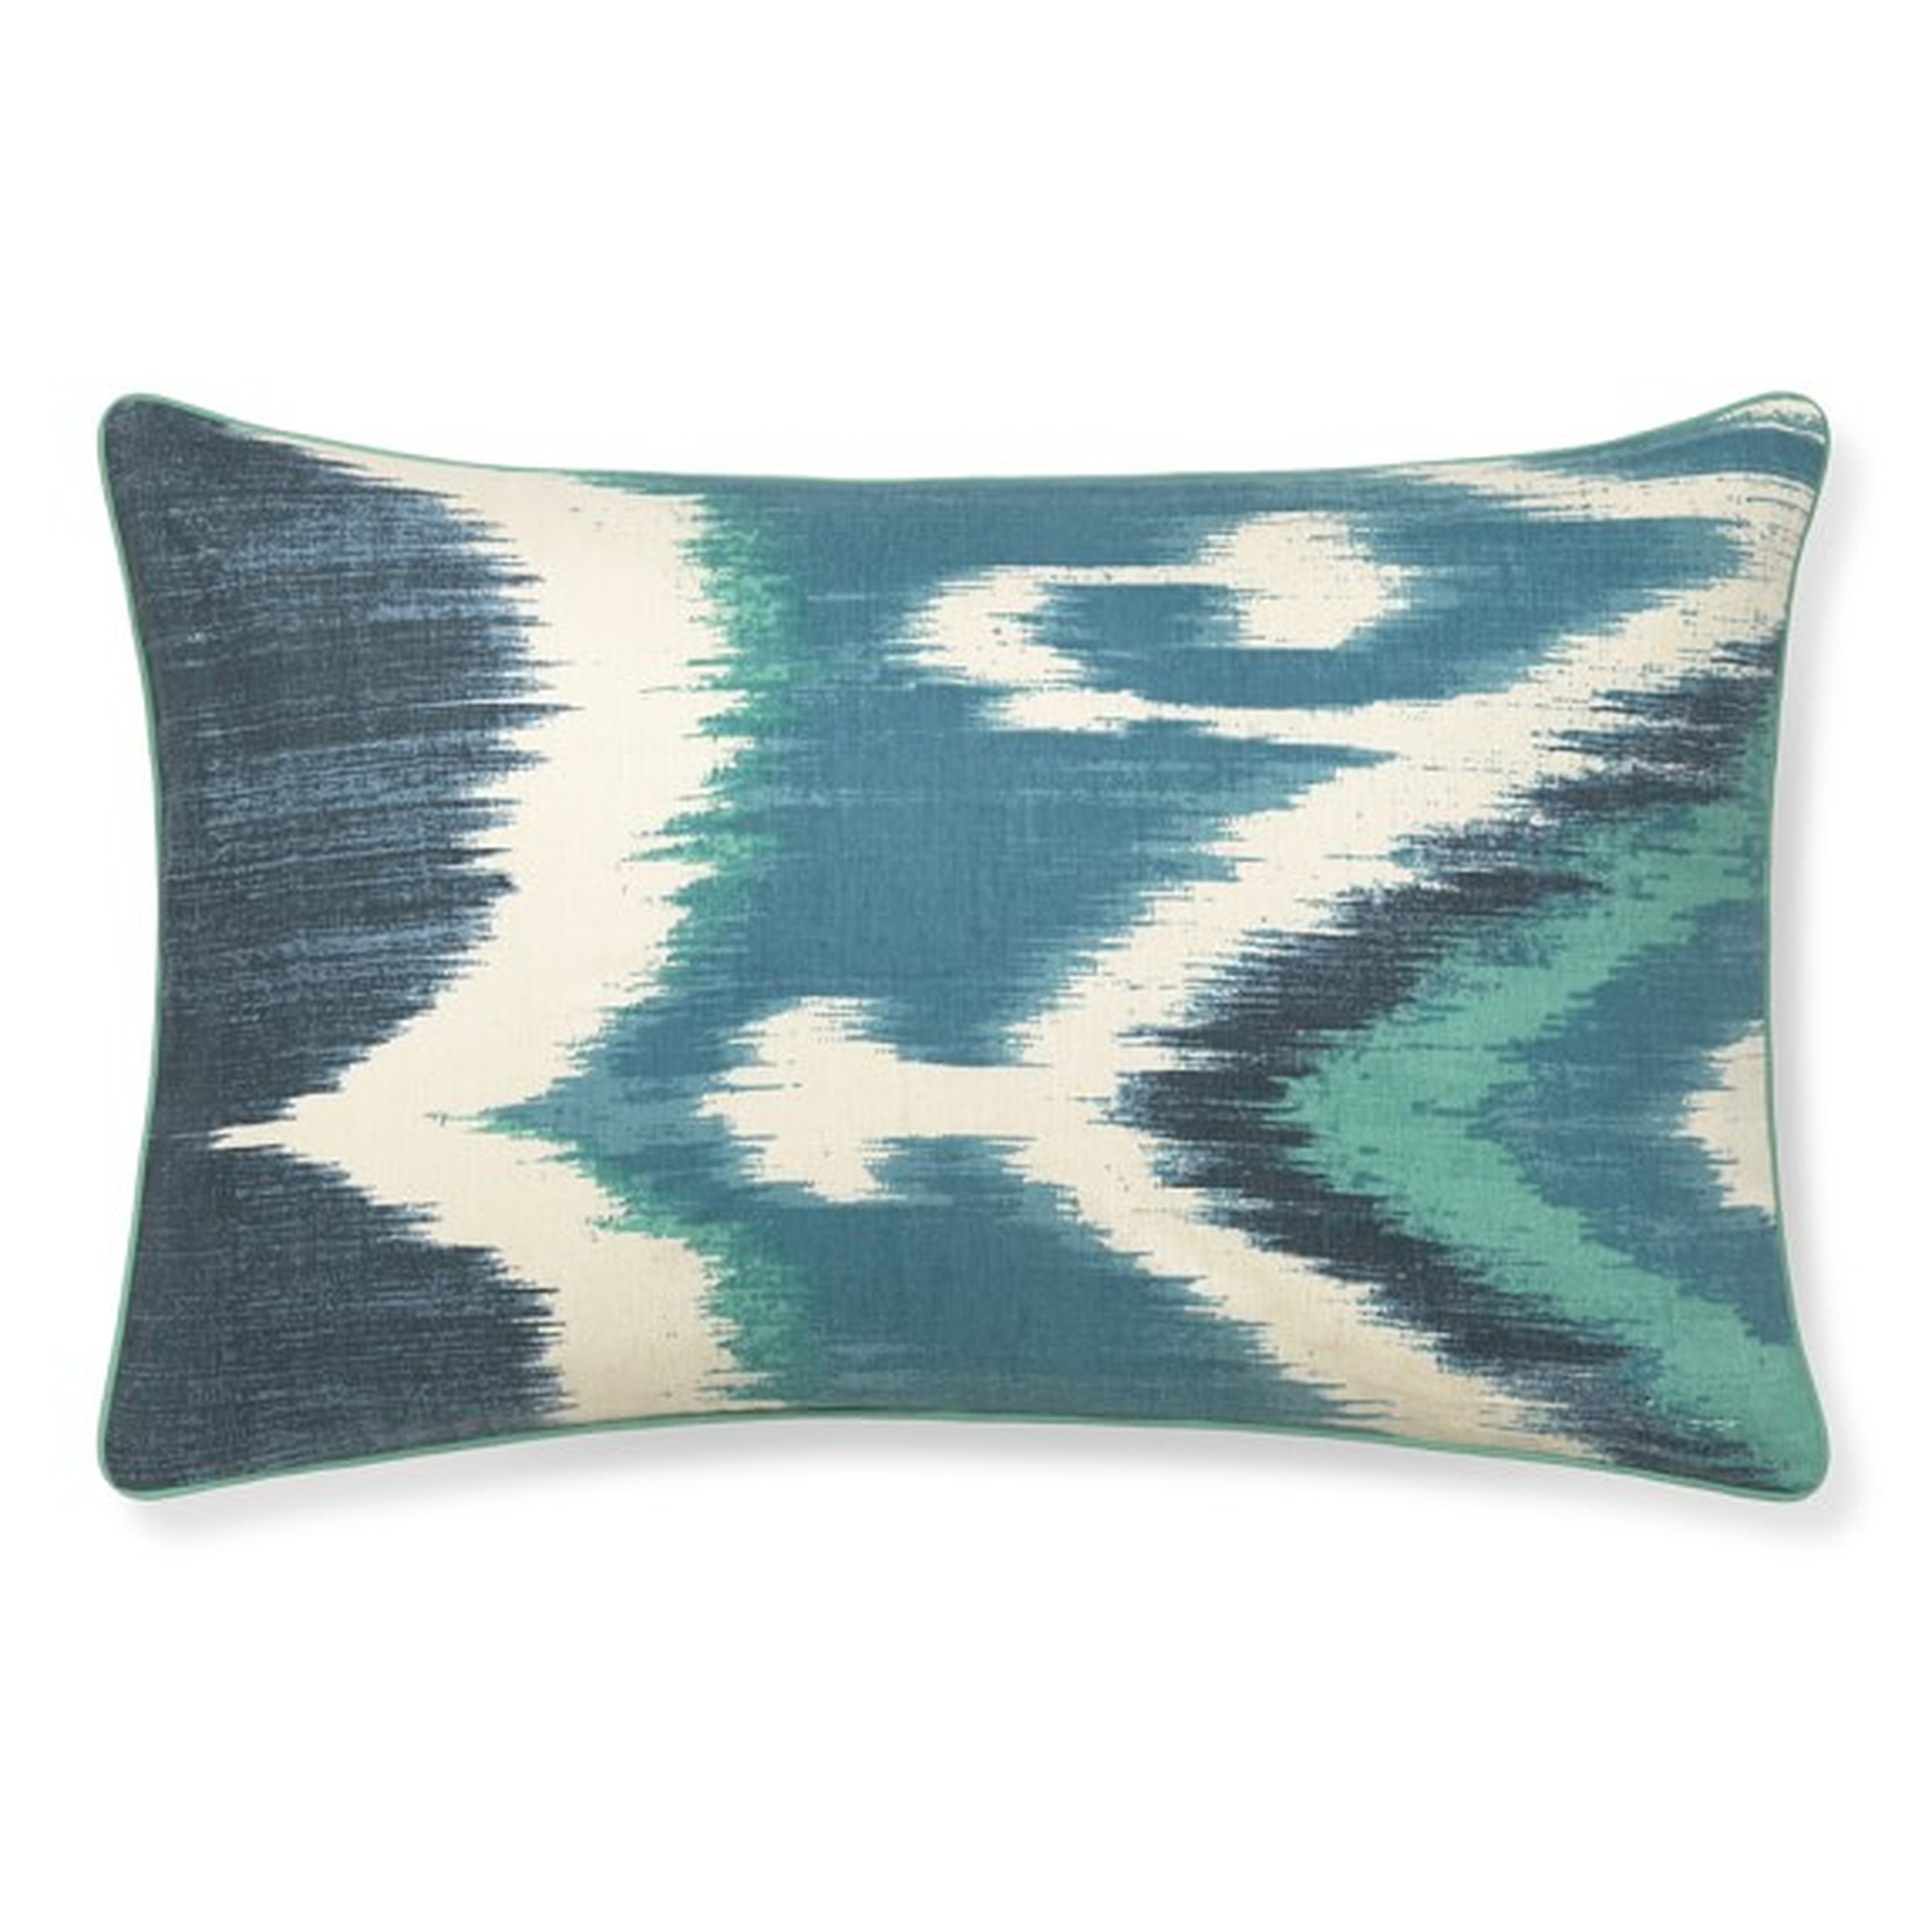 Printed Tonal Ikat Pillow Cover, 14" X 22", Blue - insert sold separately - Williams Sonoma Home